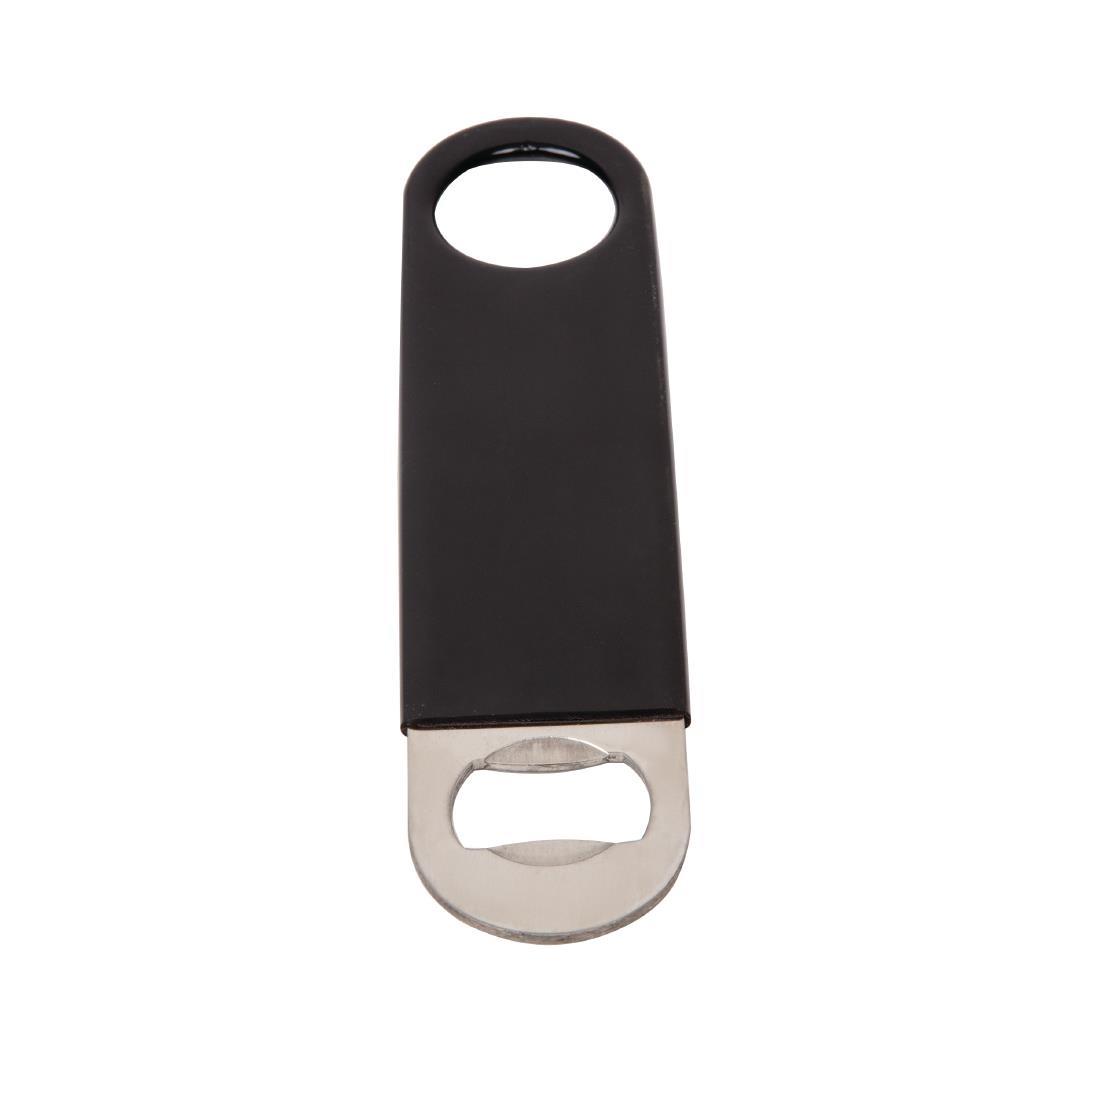 Olympia Bar Blade Bottle Opener with PVC Grip - CD273  - 4